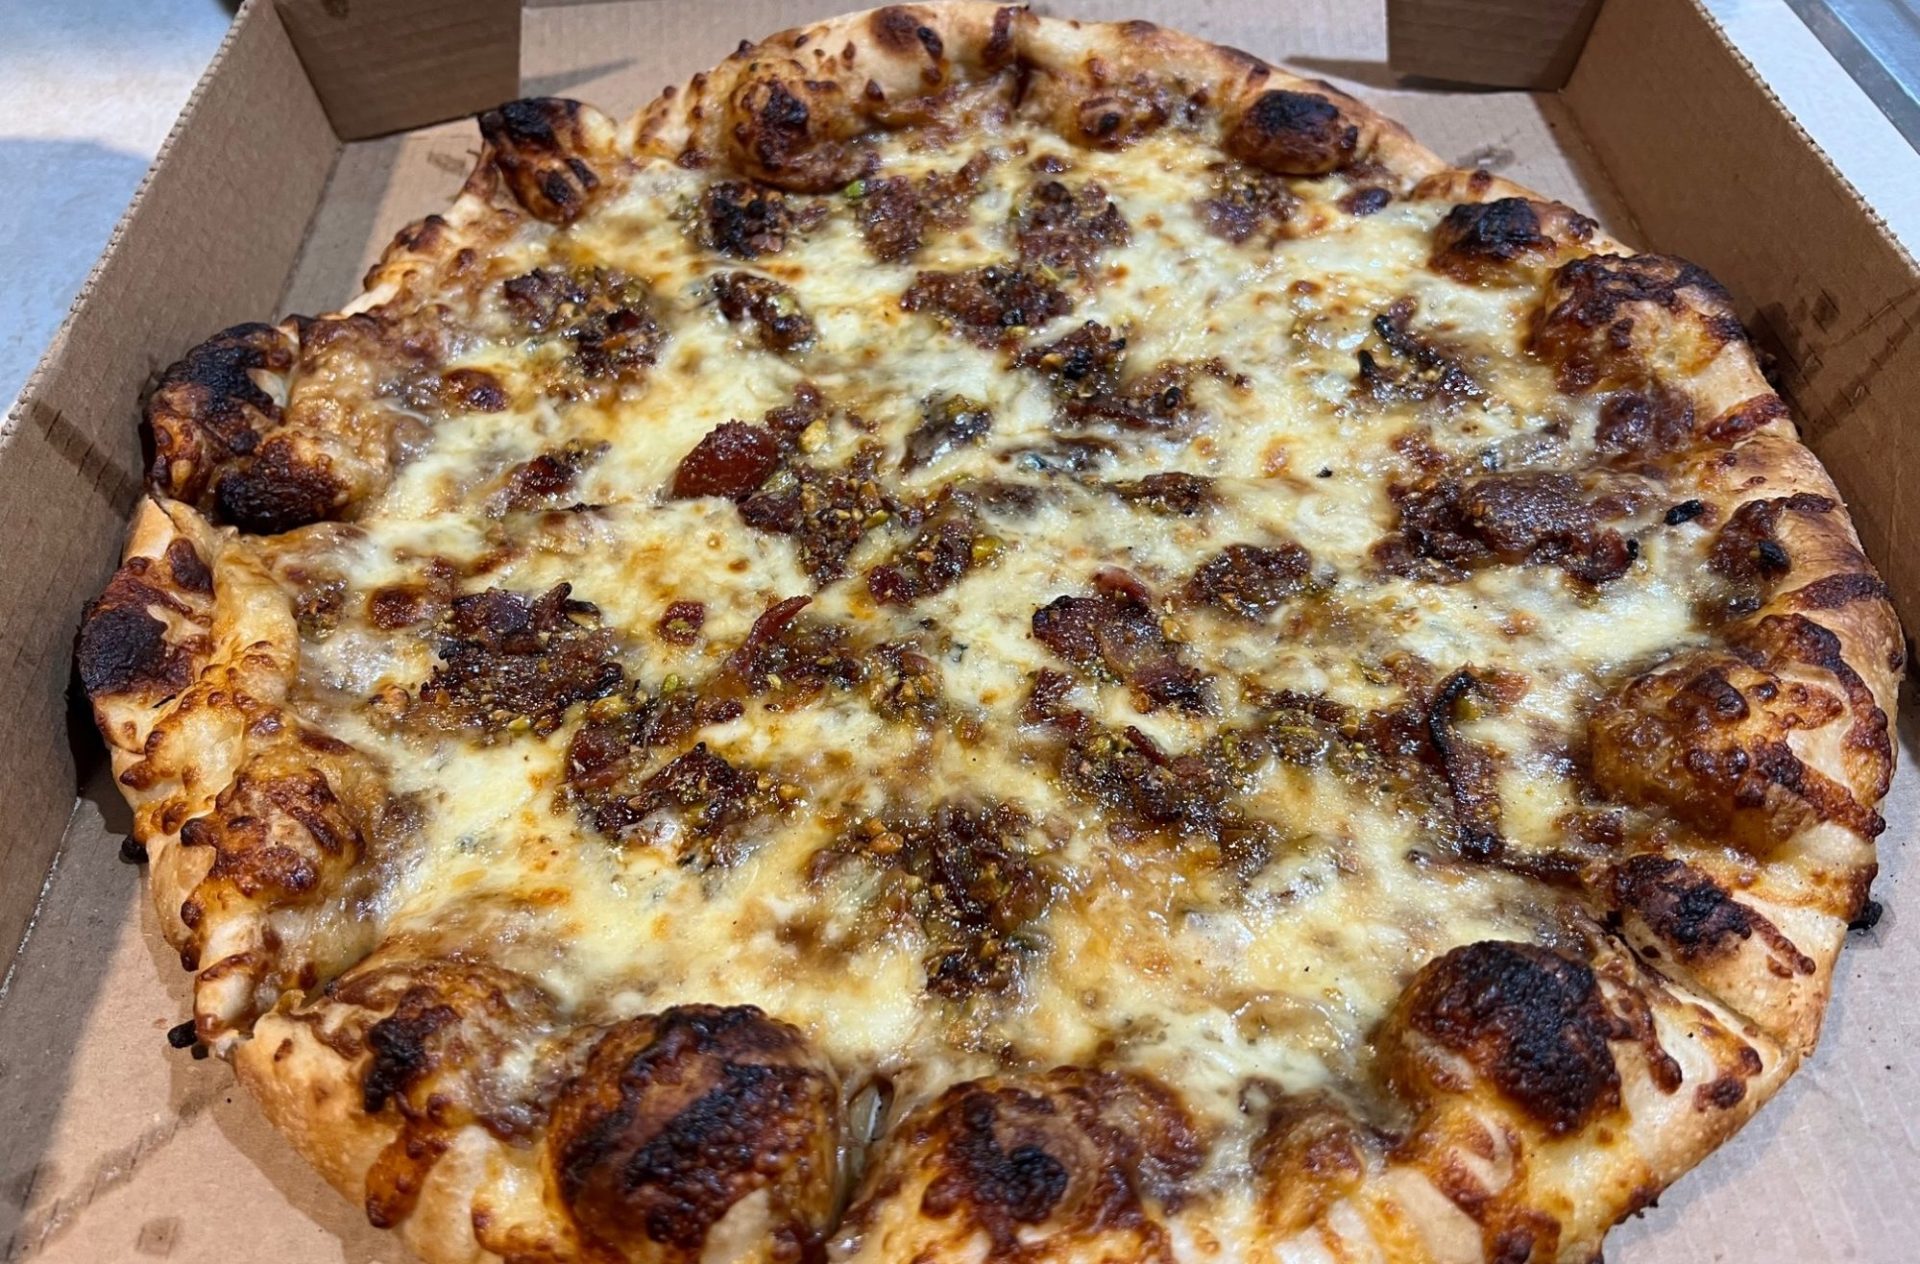 A round apple butter bacon pizza in a cardboard takeout box.